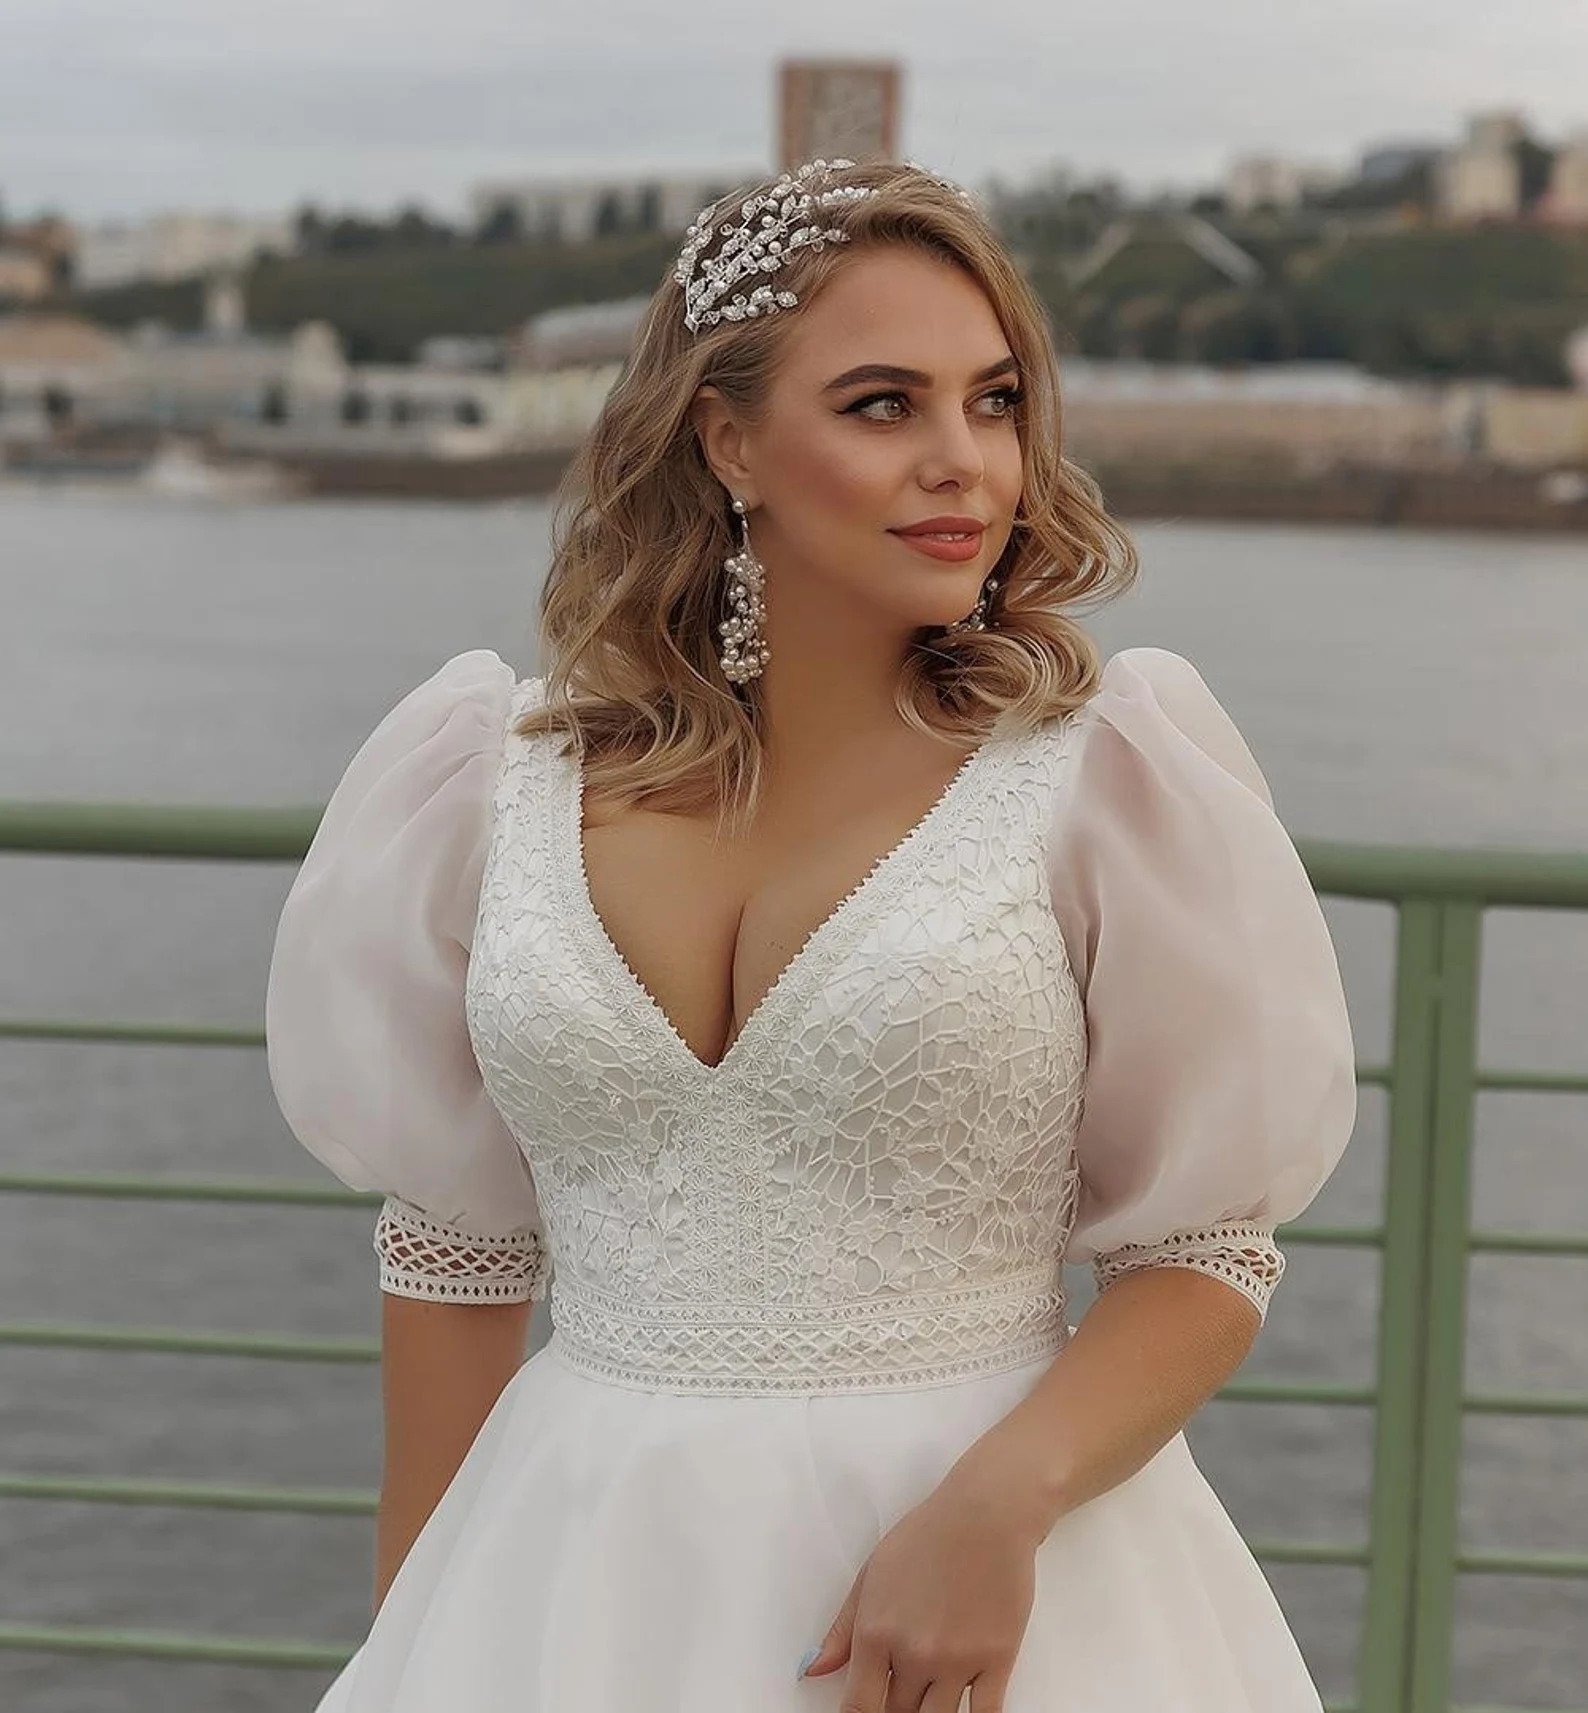 Wedding Dress Styles for Chubby Arms That You'll Love